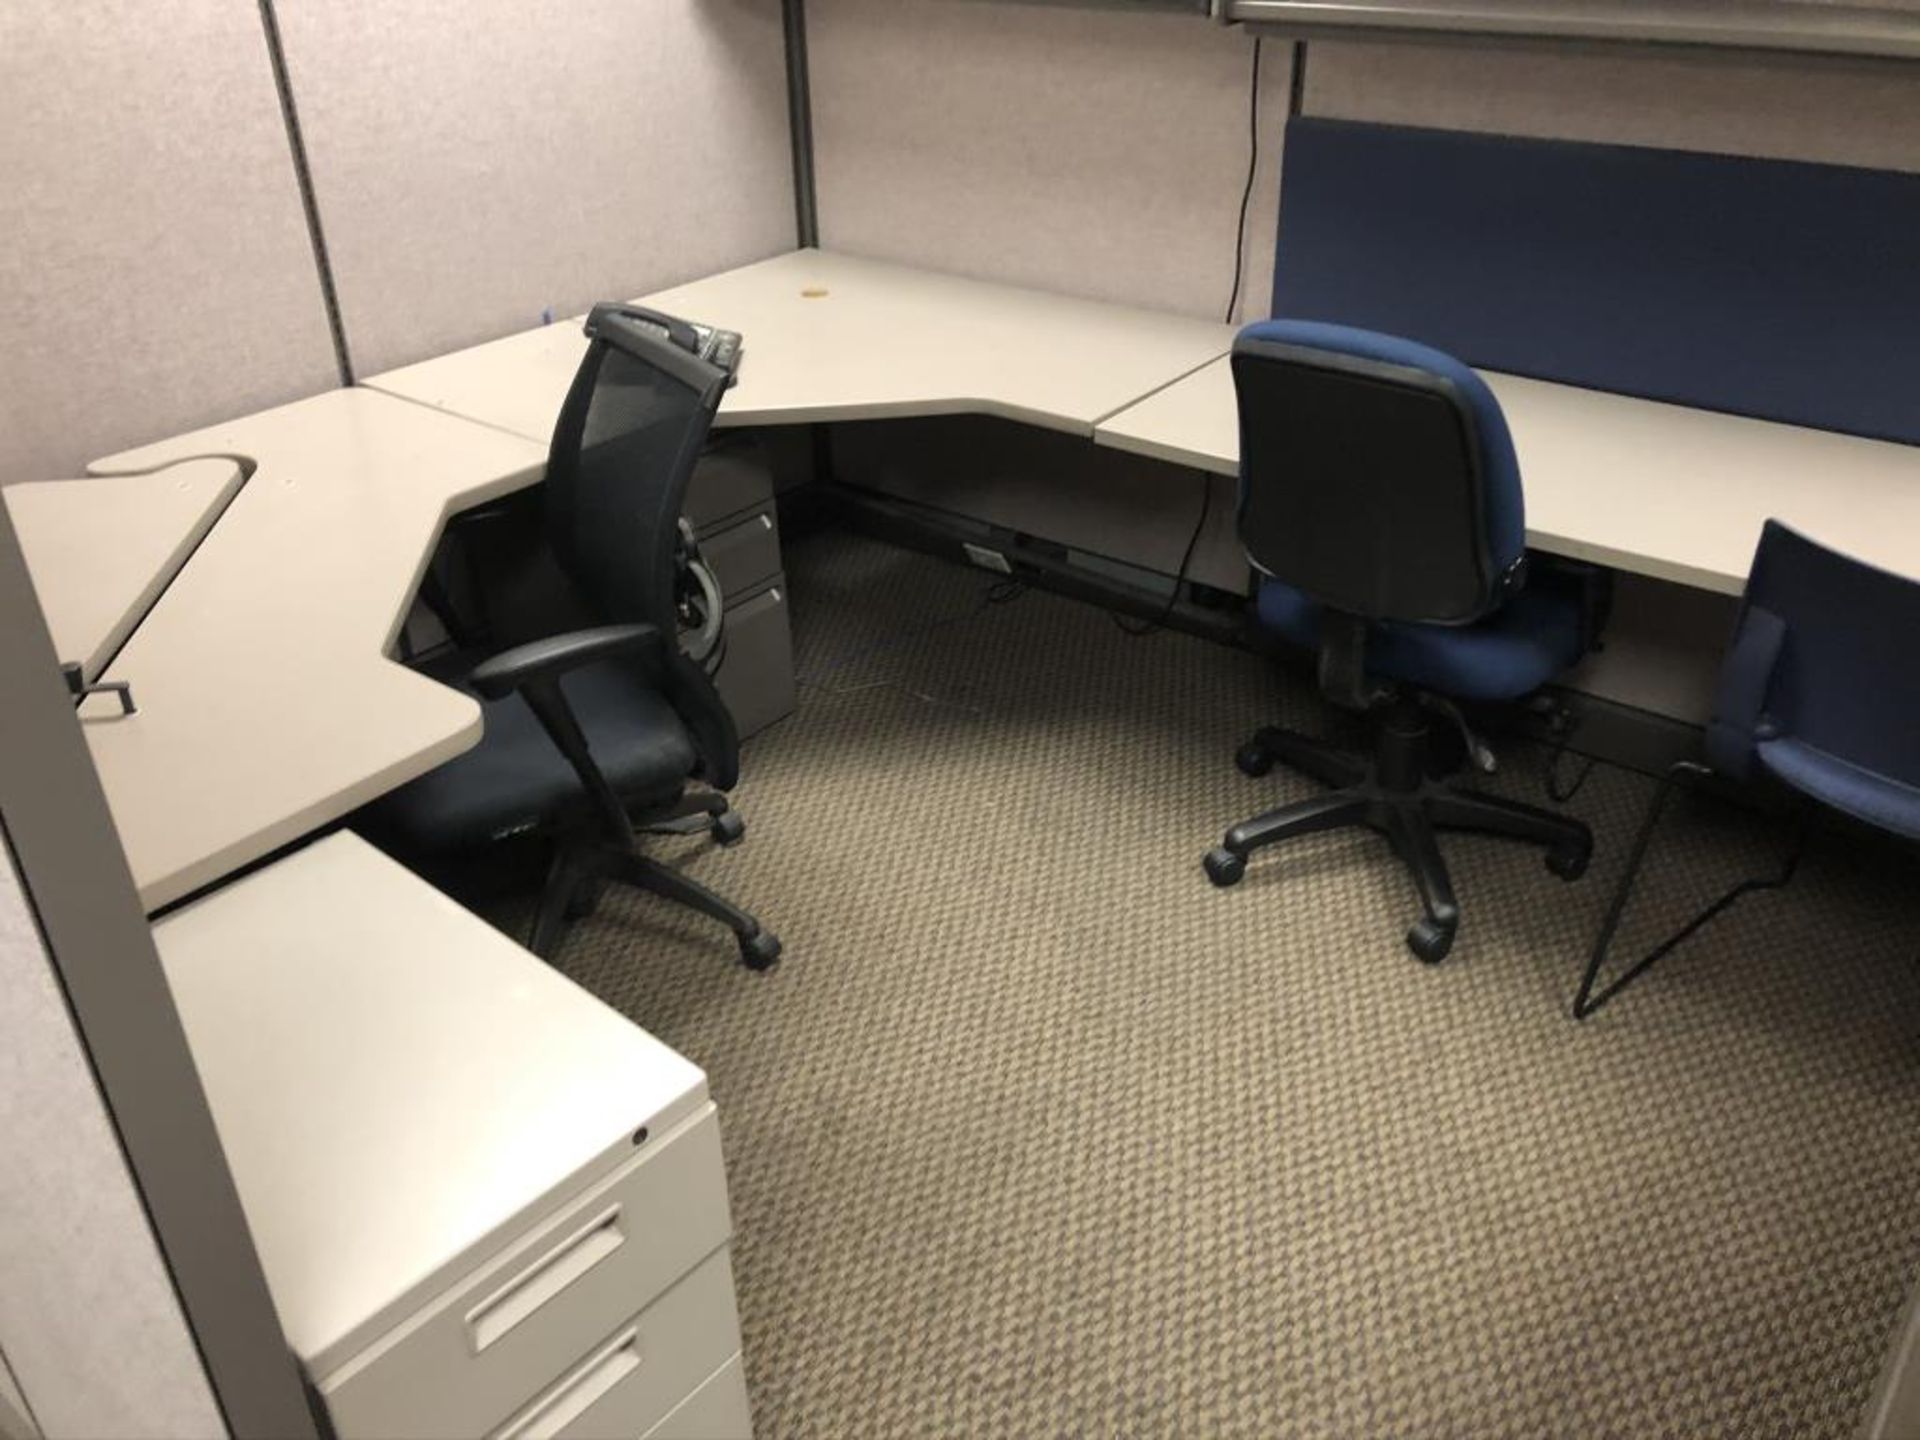 Office Furniture - Image 24 of 37